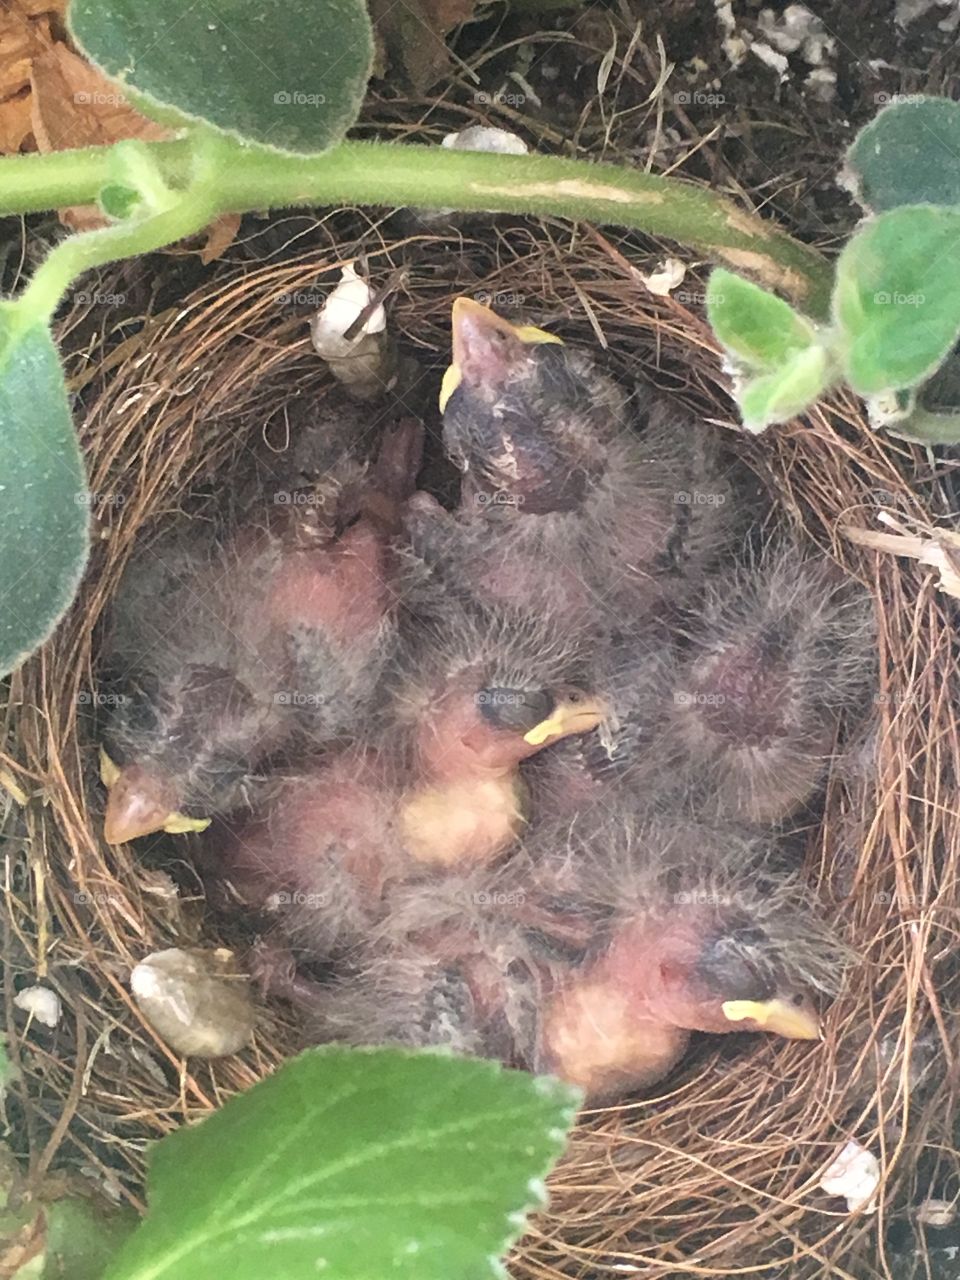 These precious little birds were living in our hanging basket on our deck! 🐦